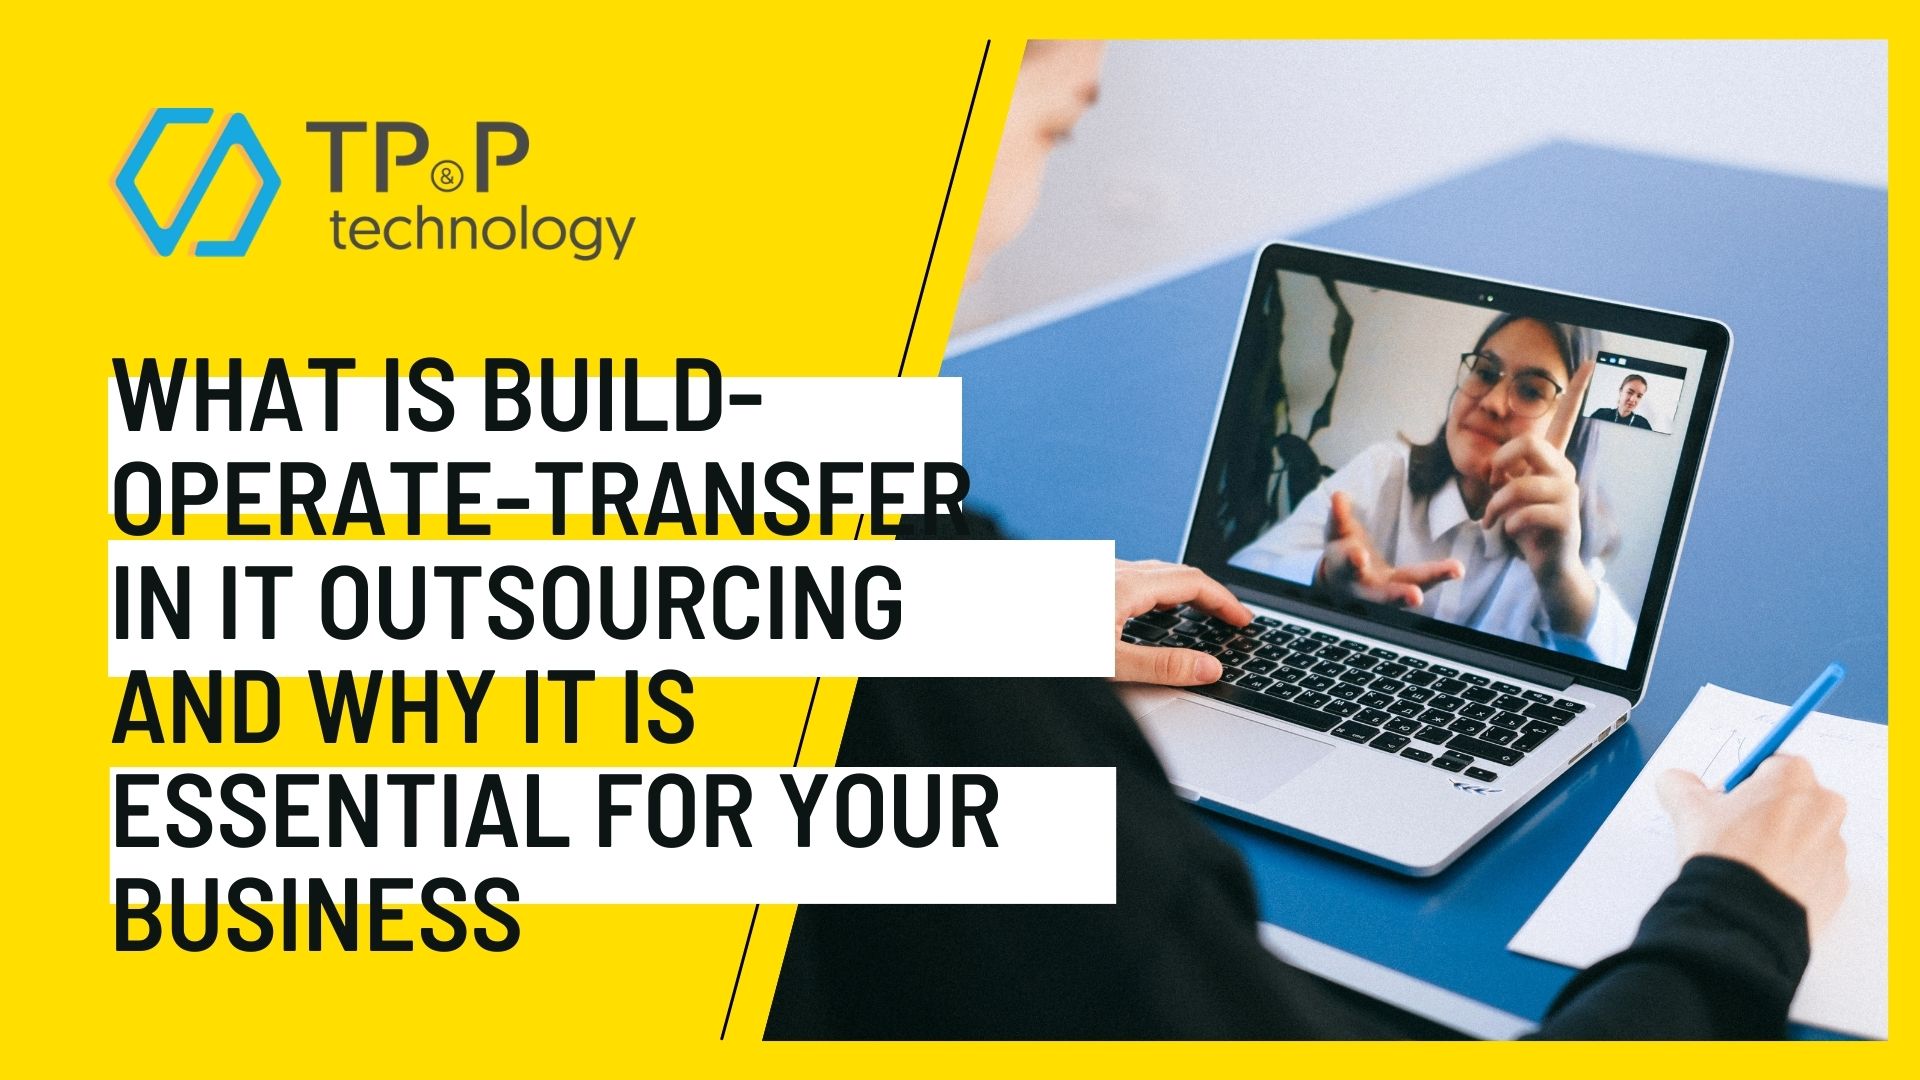 What Is Build-Operate-Transfer In IT Outsourcing And Why It Is Essential For Your Business